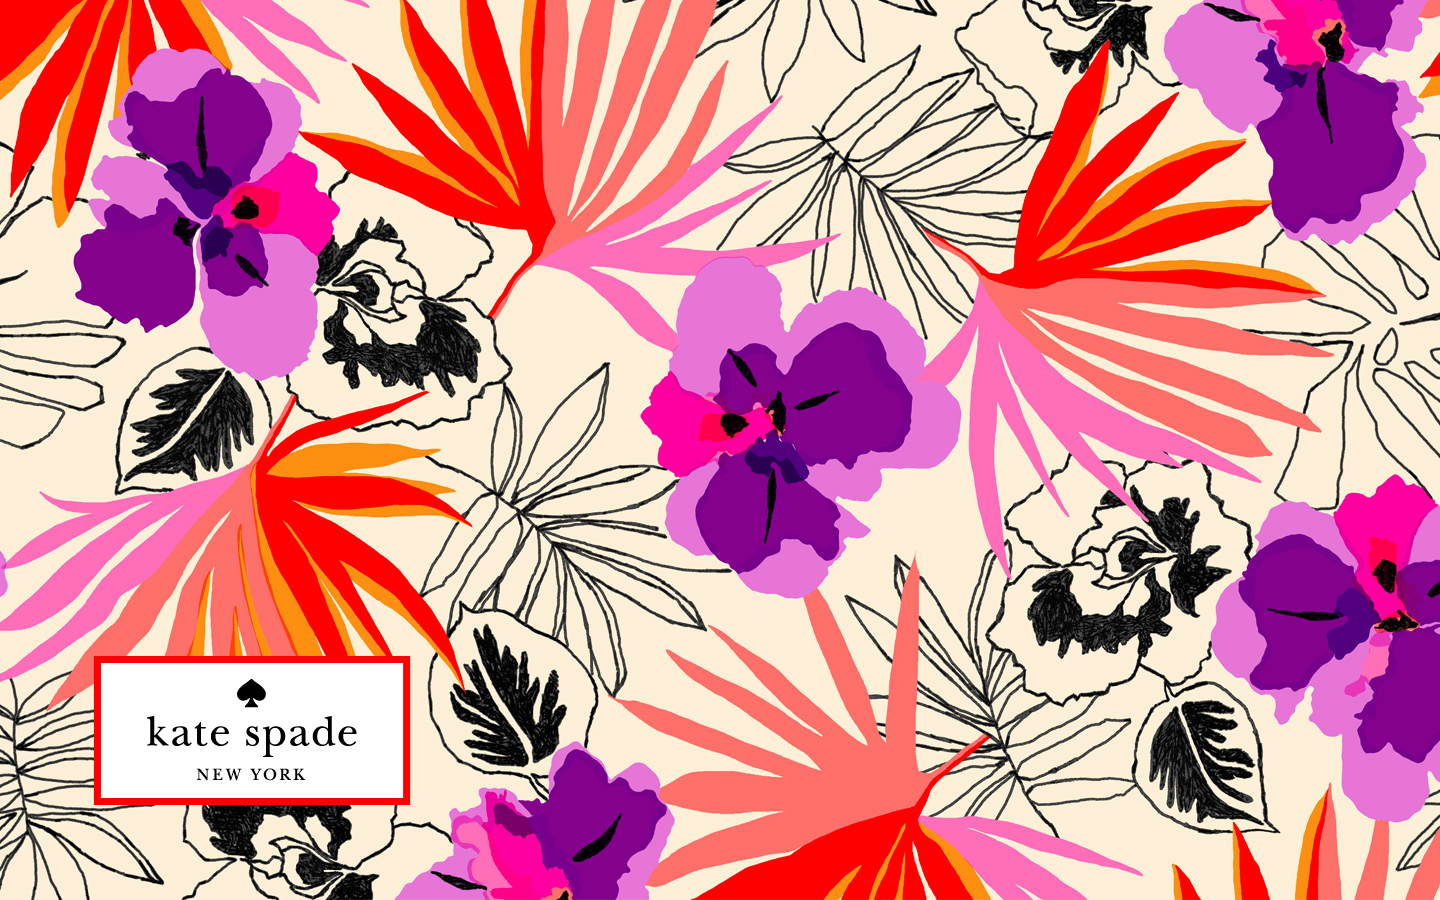 Kate Spade Art Wallpaper And Pictures Image Save As Click